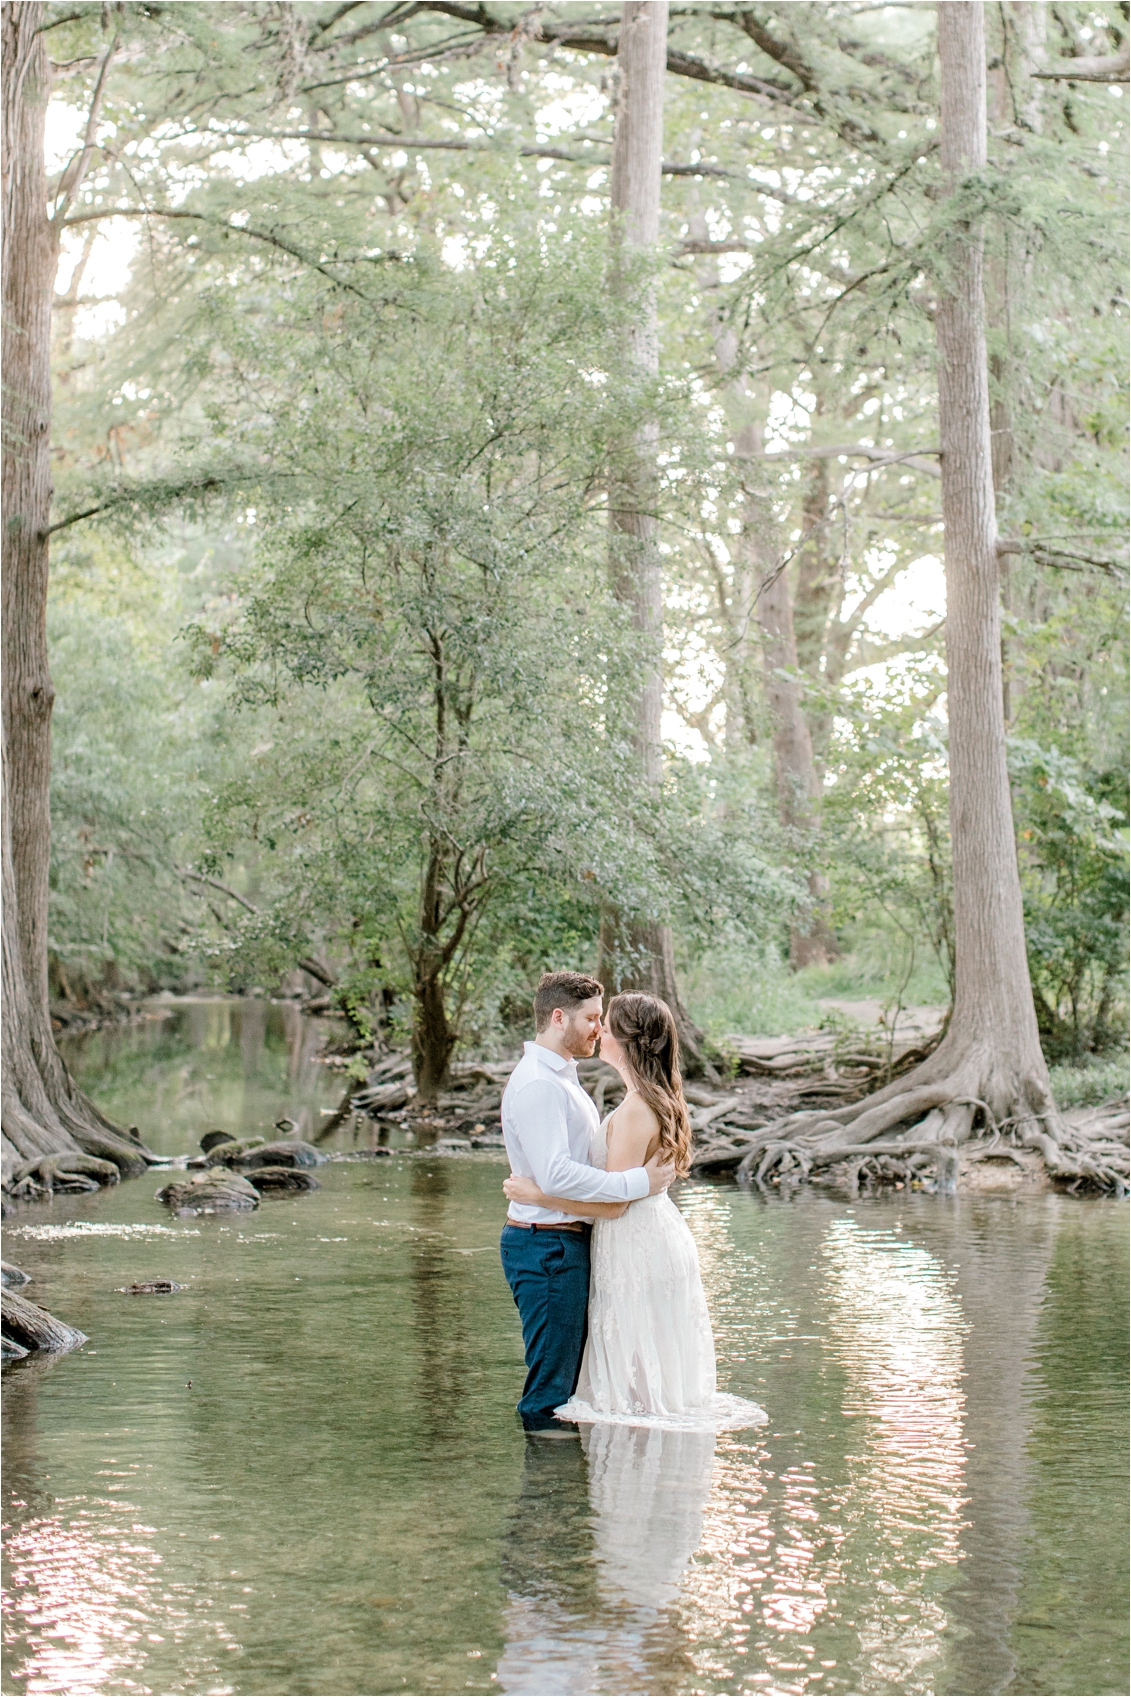 San Antonio Engagement Session Locations by Gaby Caskey Photography